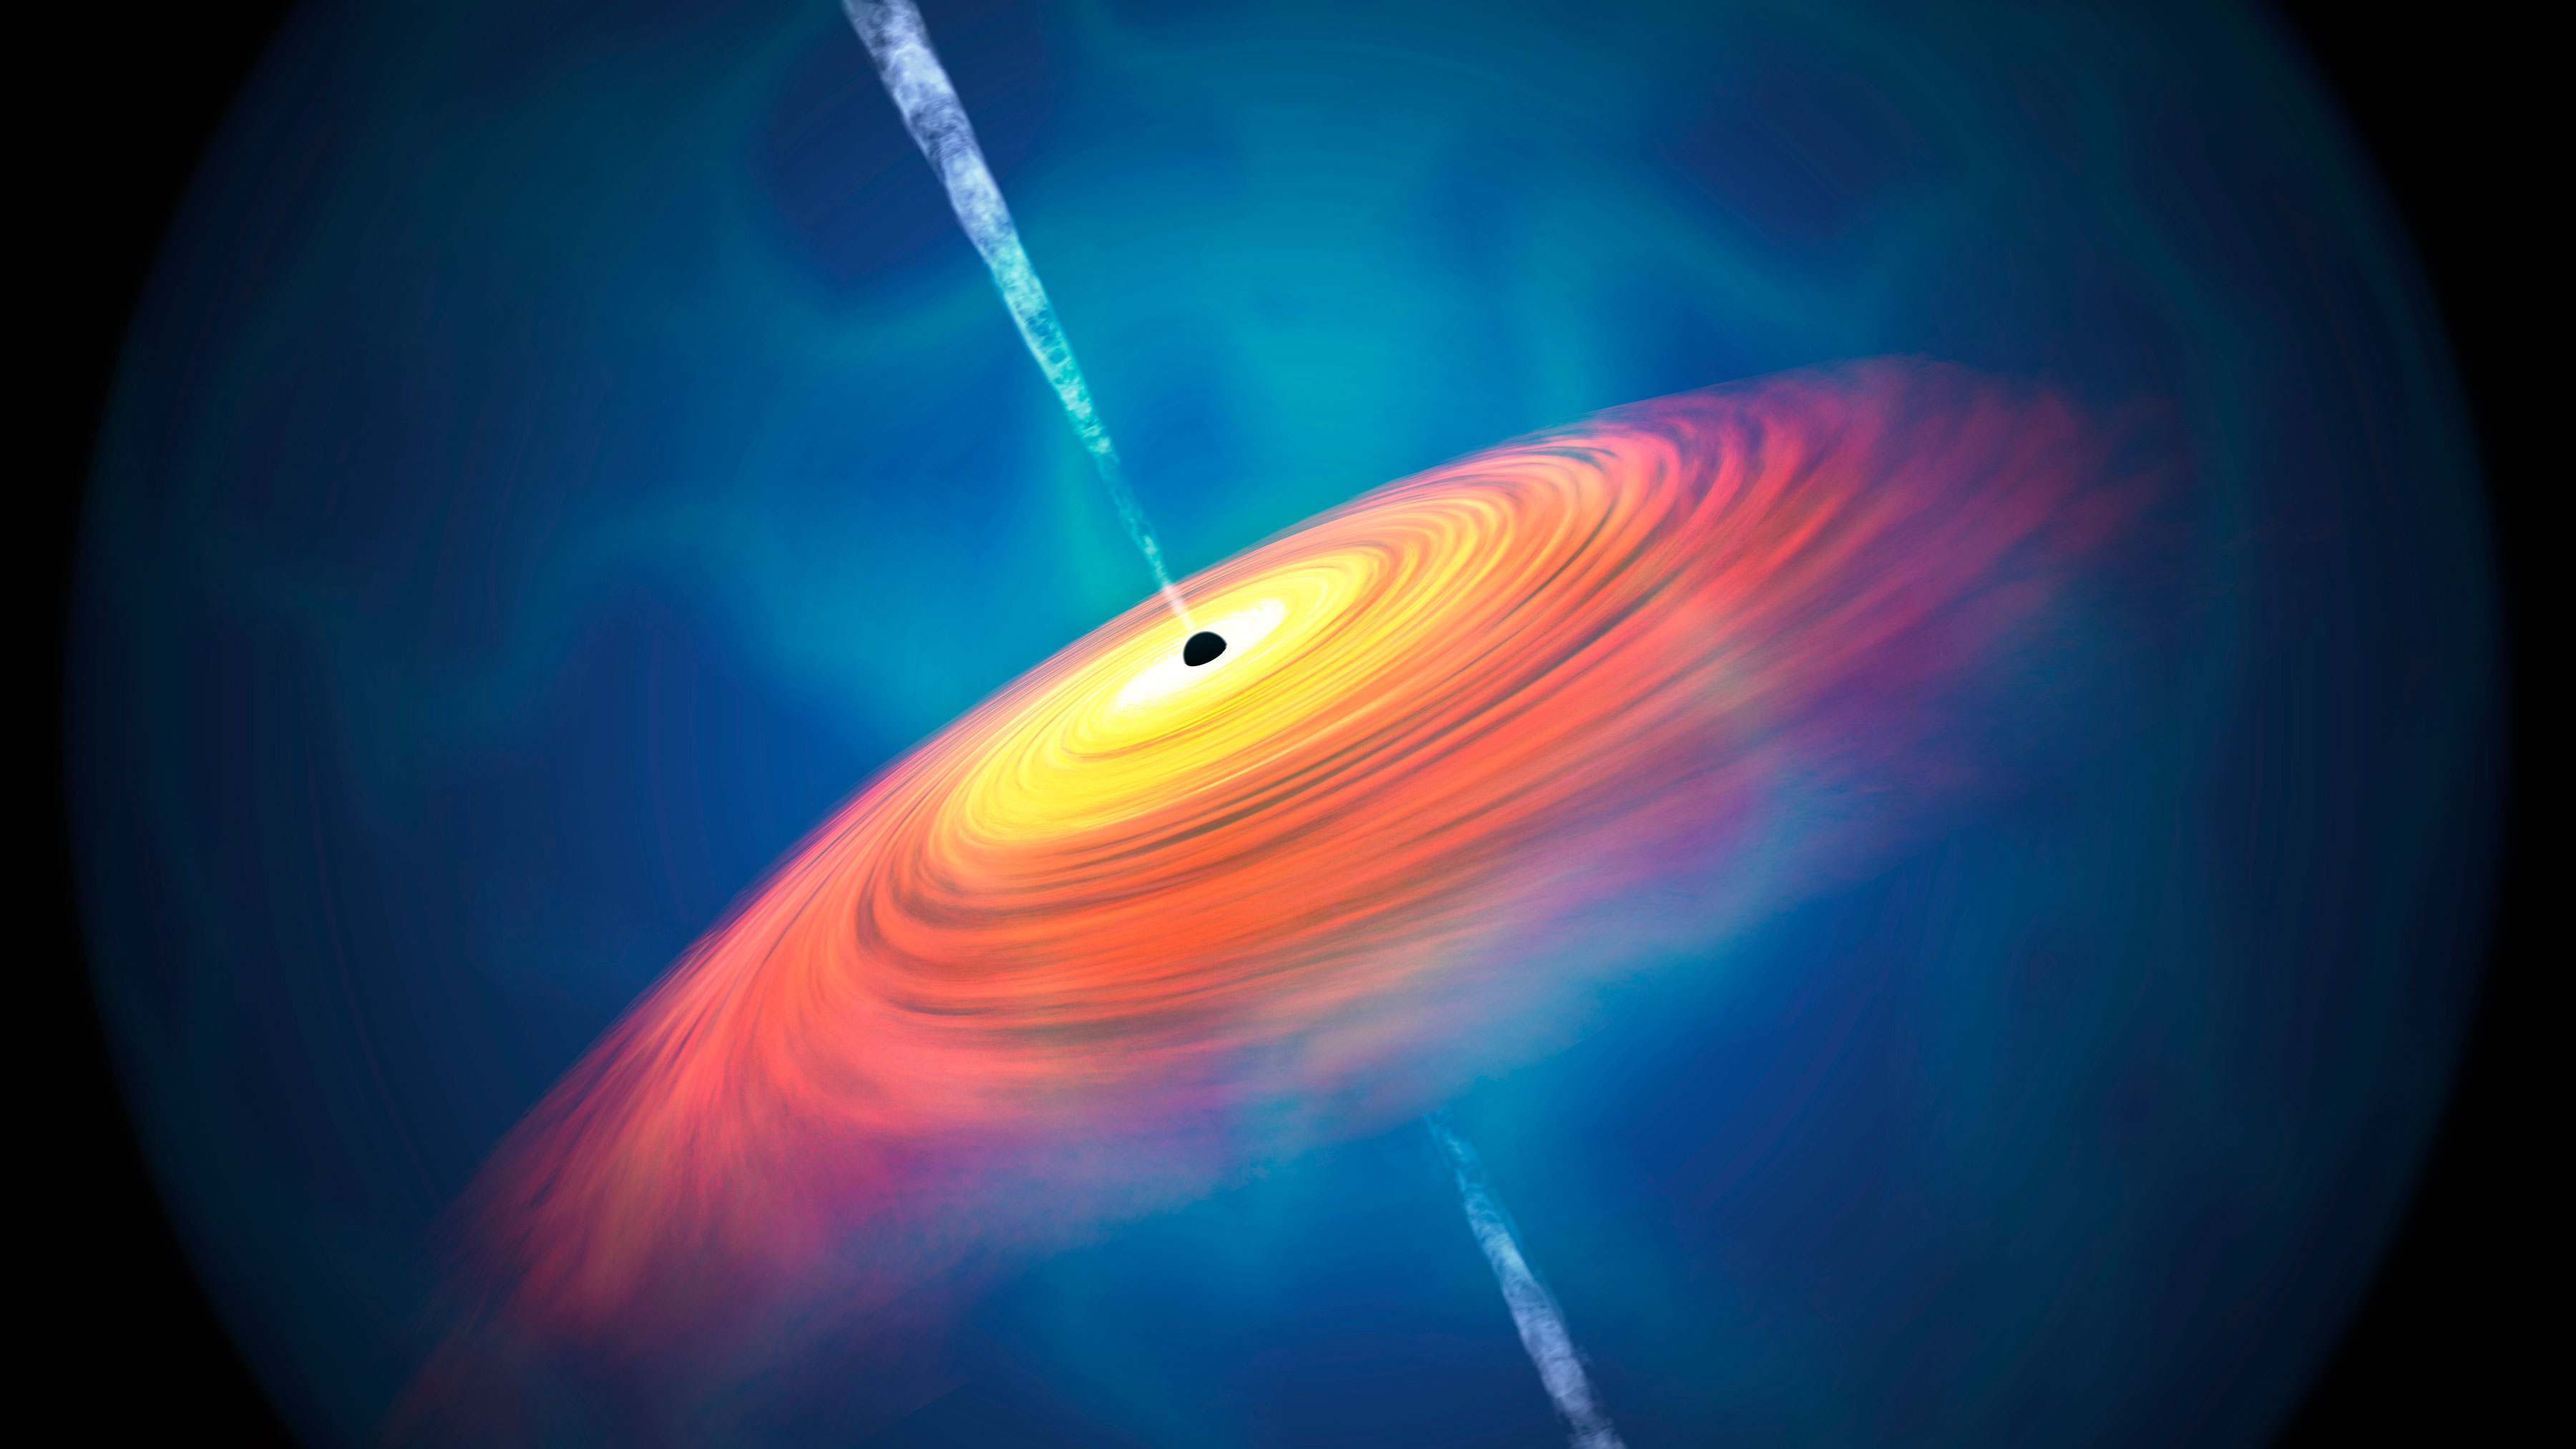 Astronomers discover 83 supermassive black holes in the early universe